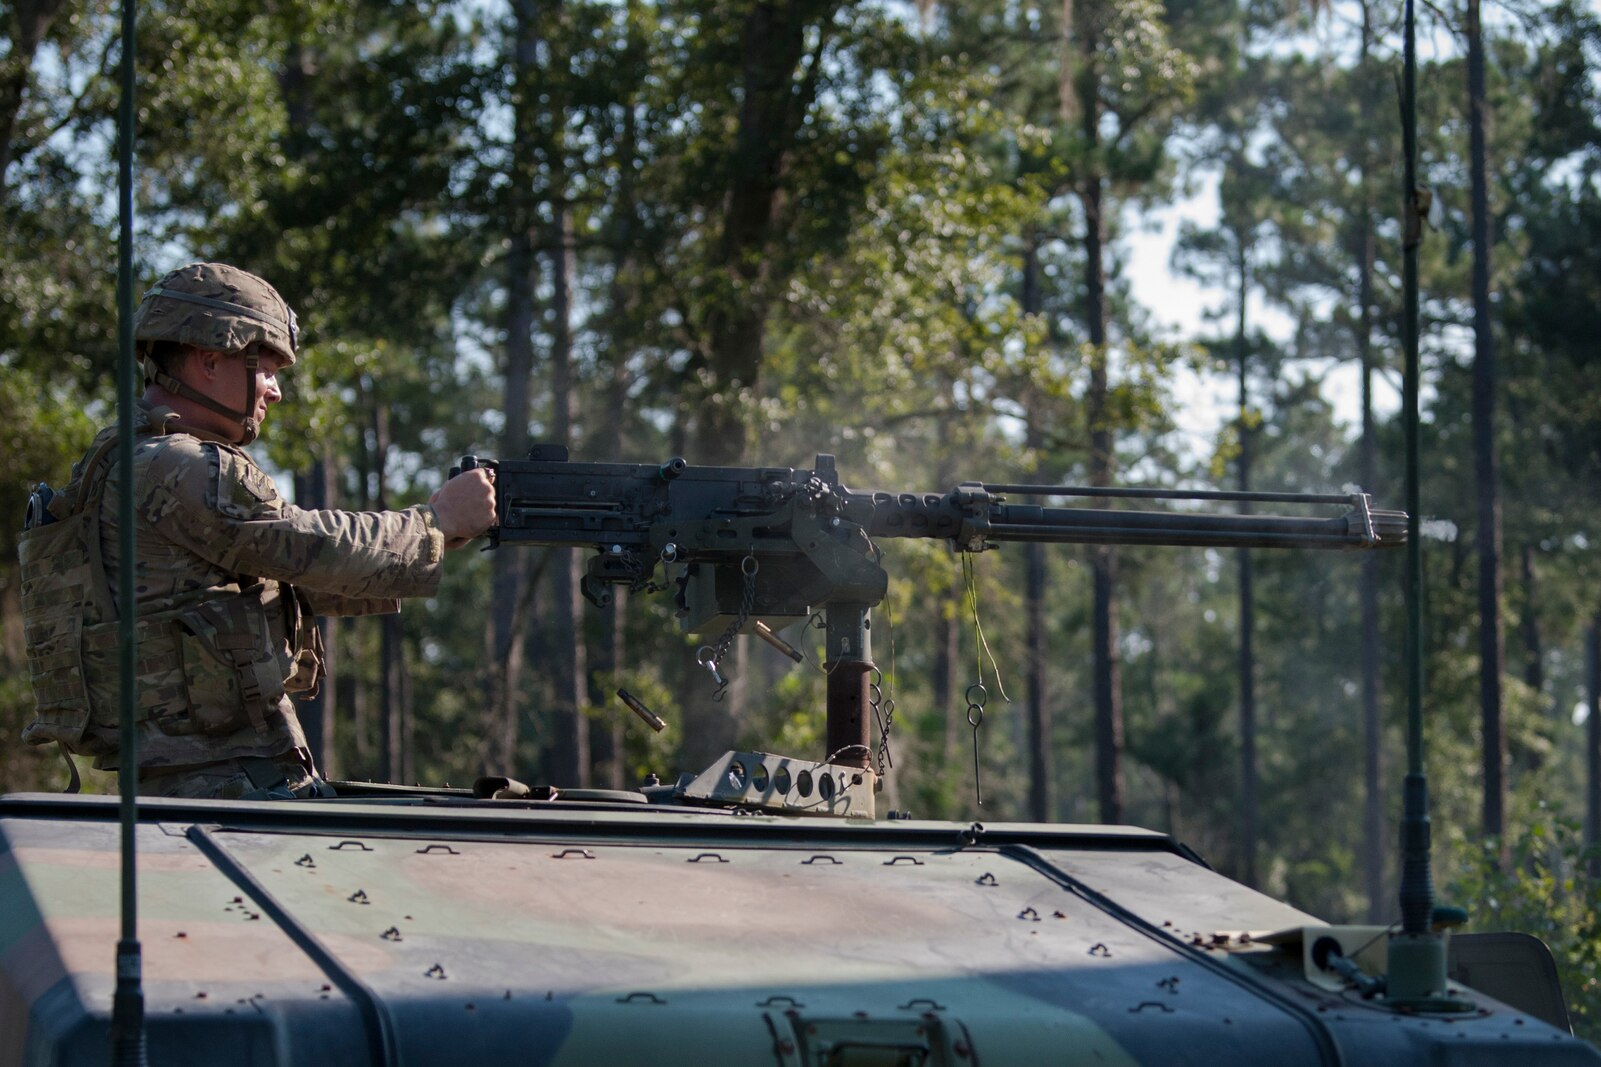 An Airman from the 822d Base Defense Squadron (BDS) fires an M2 machine gun during a full mission profile assessment, July 24, 2018, at Moody Air Force Base, Ga. The ‘Safeside’ defenders evaluated their base defense tactics and procedures while performing patrols, tactical combat casualty care and countering improvised explosive devices for a mission readiness exercise. After successfully completing these events, the defenders are eligible to earn their Global Response Force status, which certifies the unit to deploy worldwide. (U.S. Air Force photo by Airman Taryn Butler)